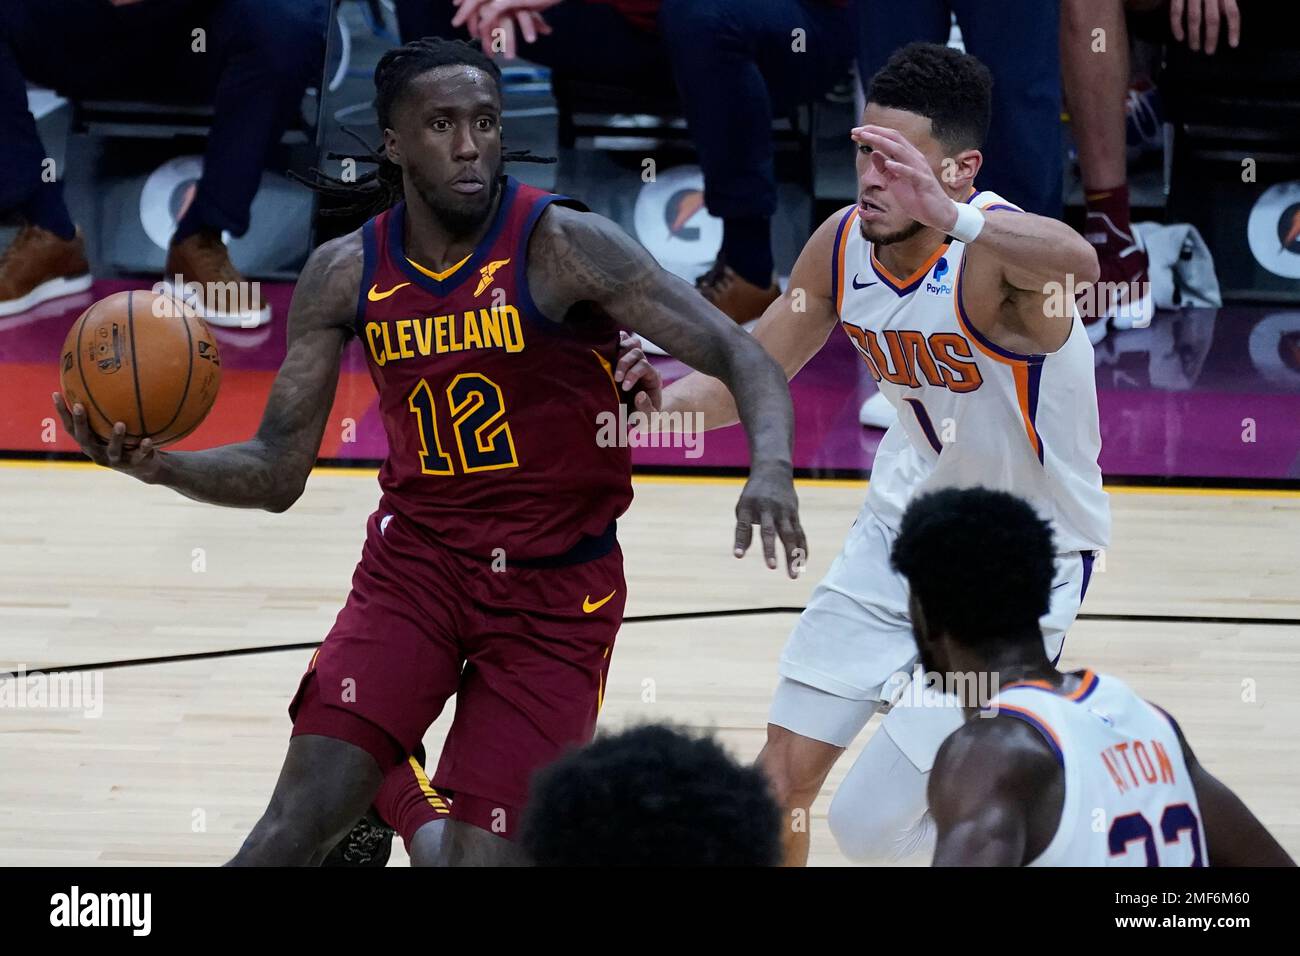 Cleveland Cavaliers forward Taurean Prince (12) drives past Phoenix Suns guard Devin Booker (1) during the first half of an NBA basketball game, Monday, Feb. 8, 2021, in Phoenix. (AP Photo/Matt York) Banque D'Images